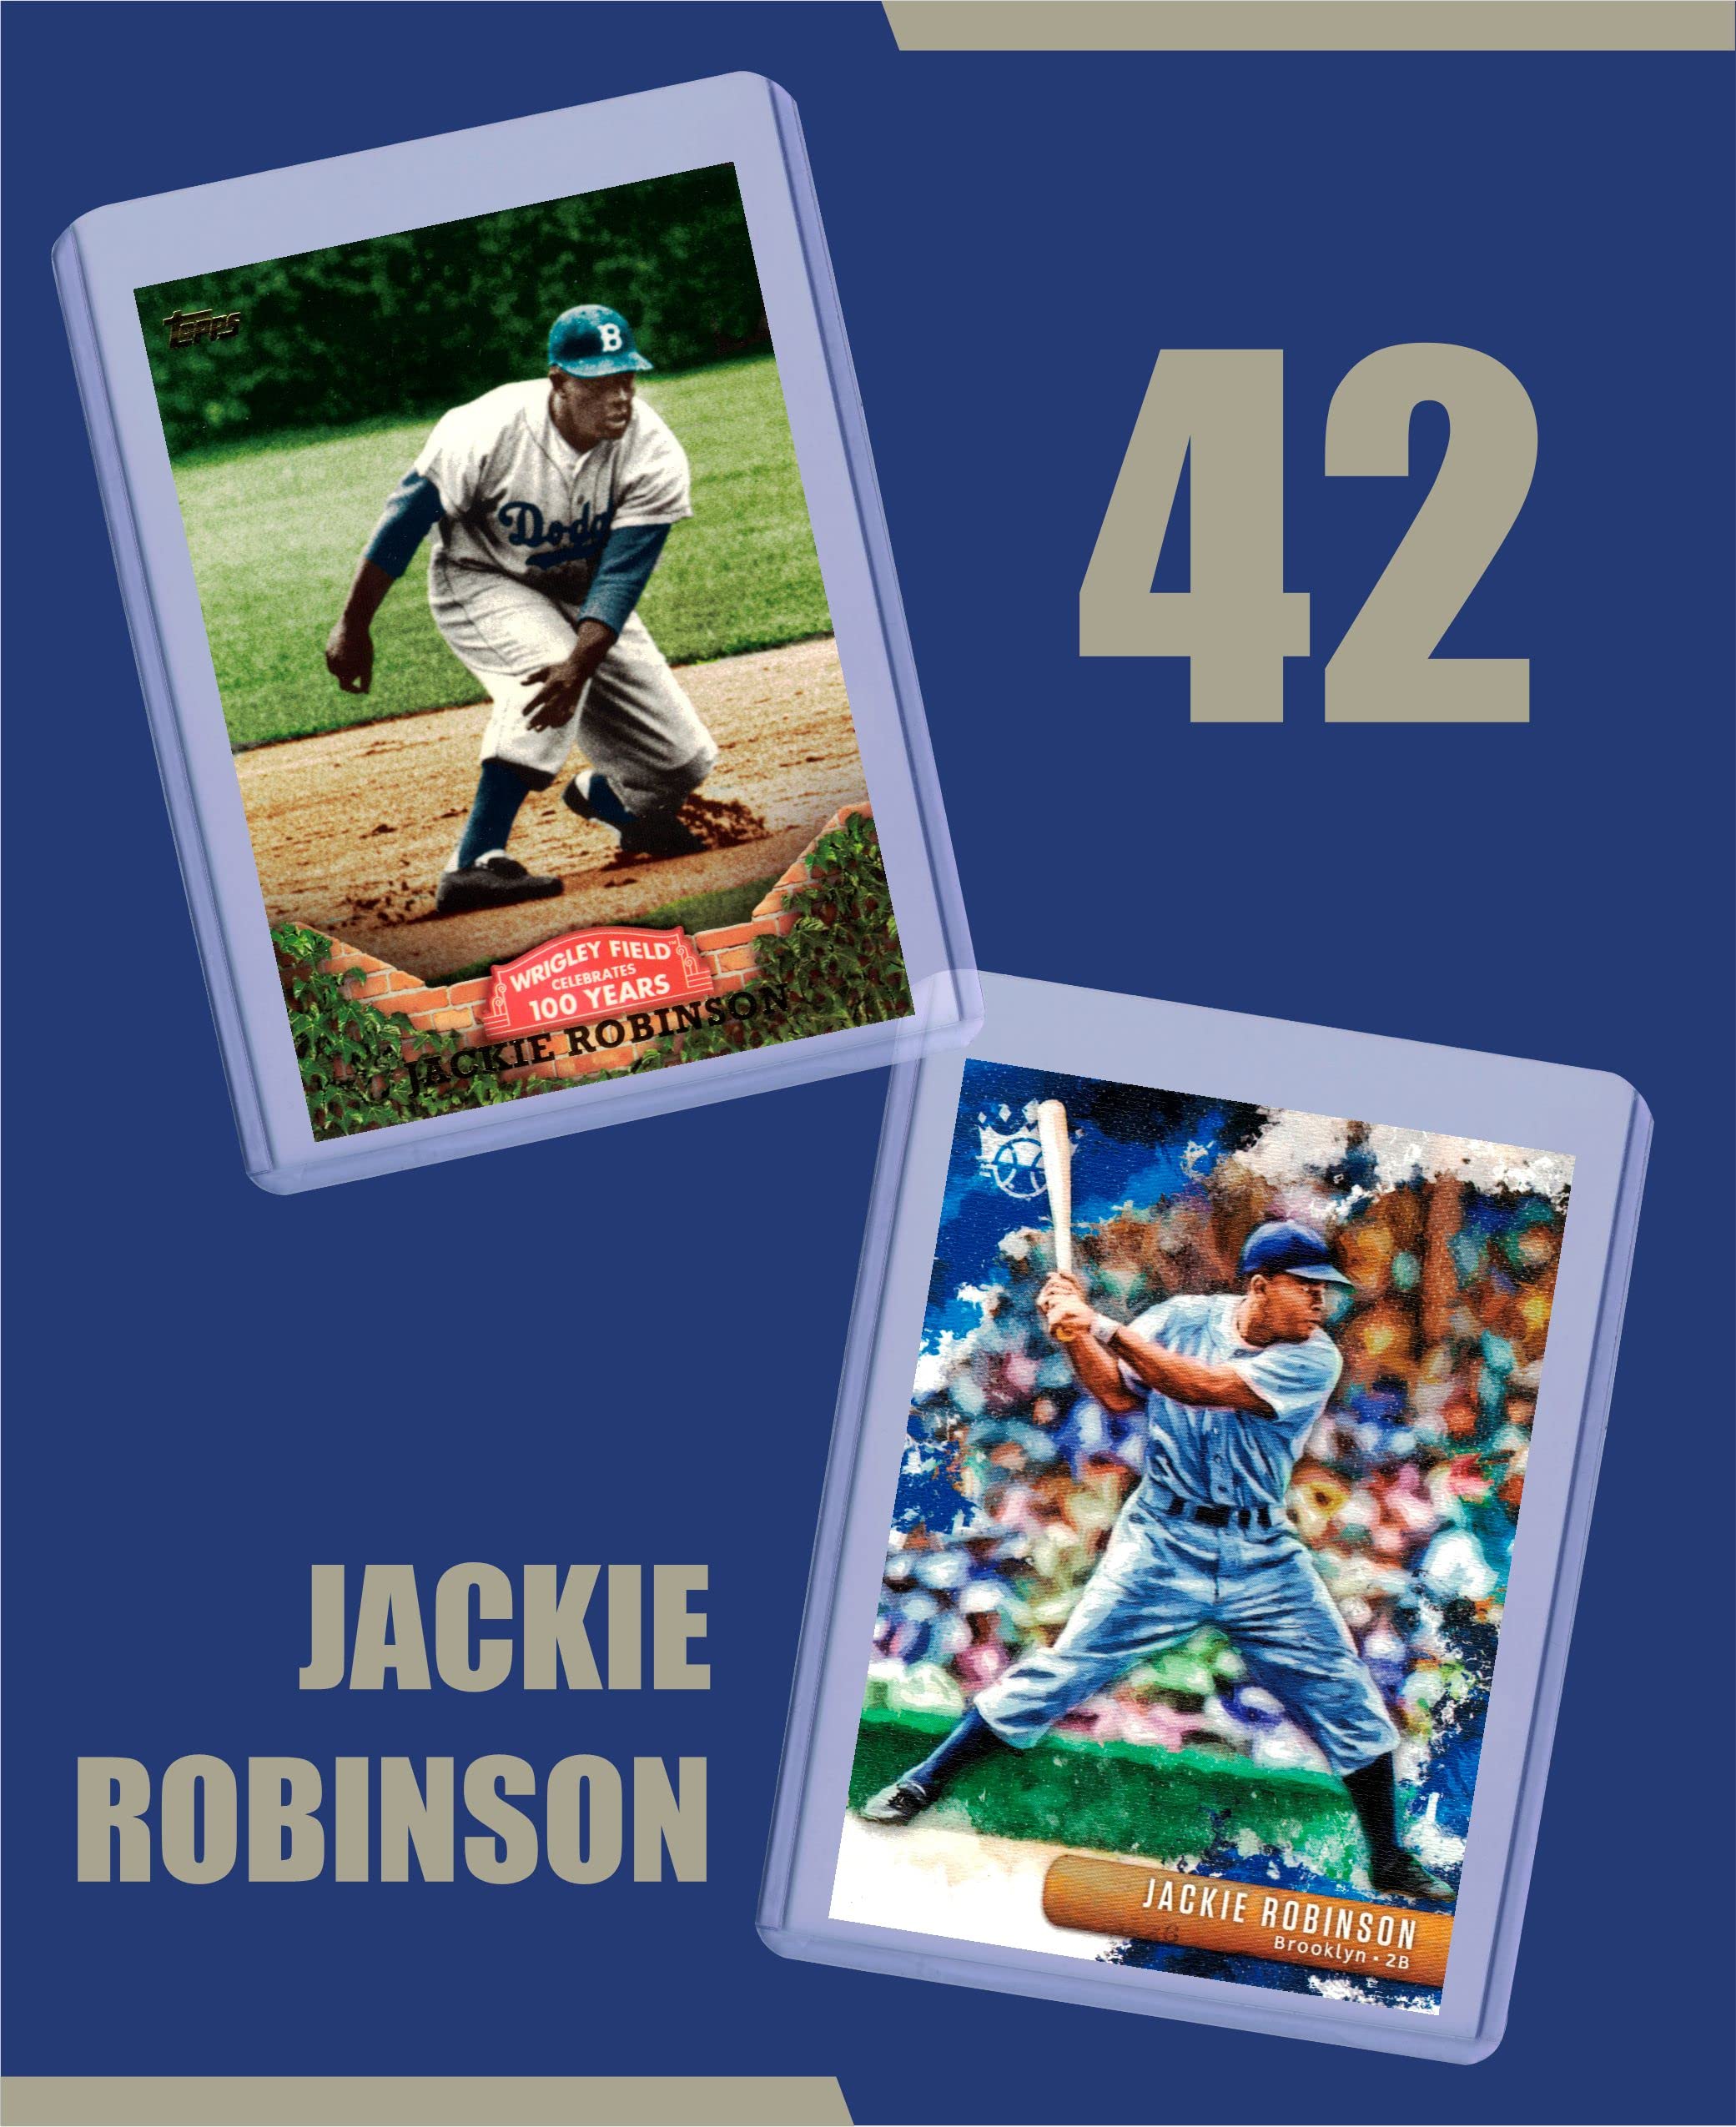 Jackie Robinson Baseball Cards (5) Assorted Brooklyn Dodgers Trading Card and Wristbands Gift Bundle